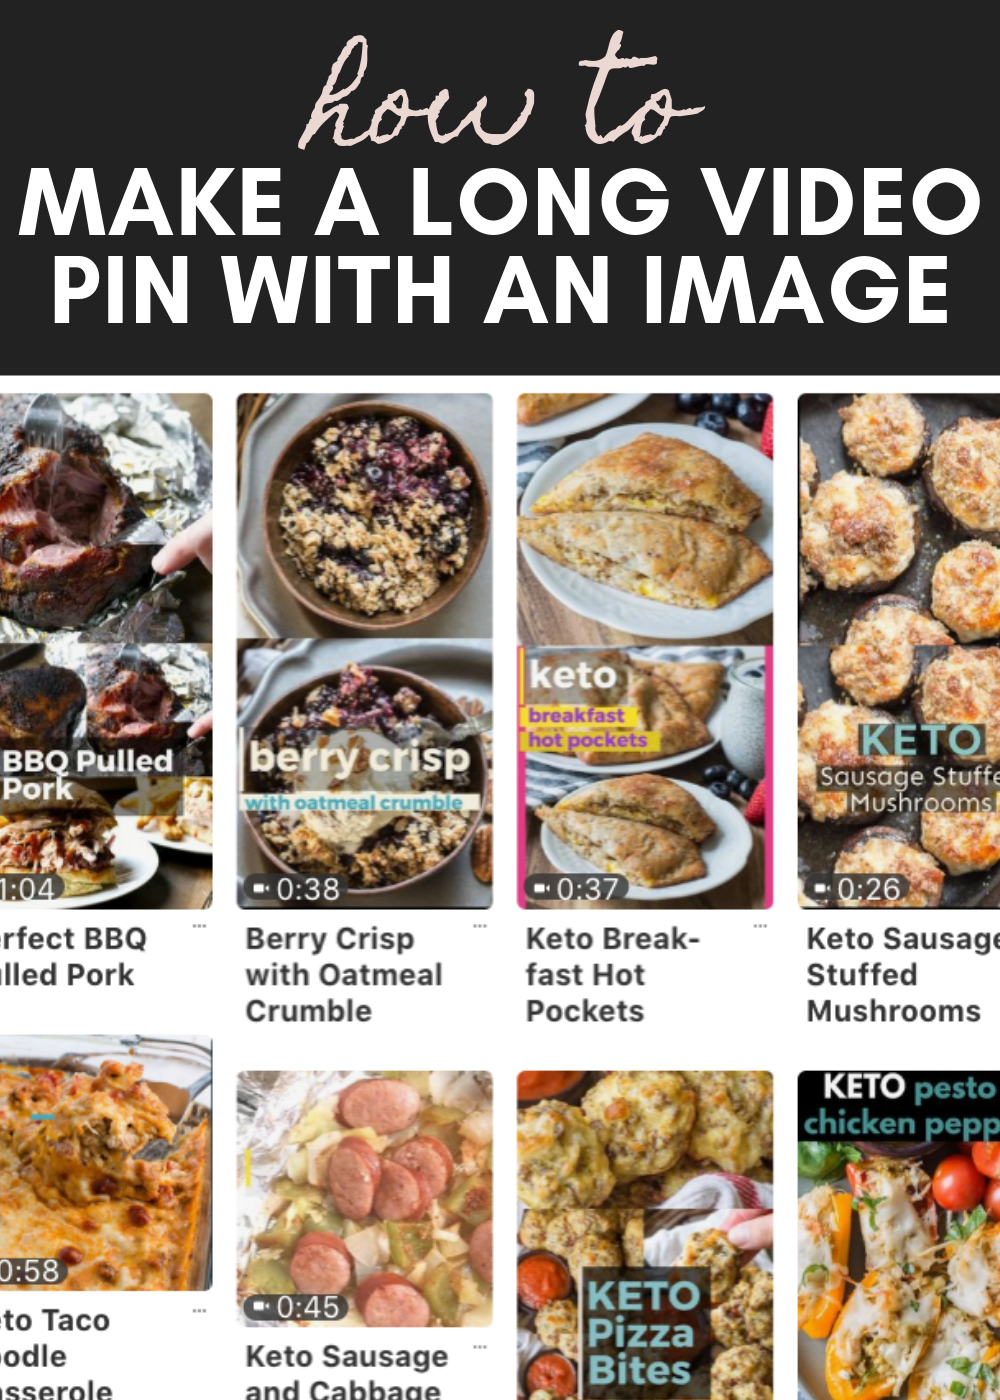 Learn how to make a video pin with image for Pinterest!